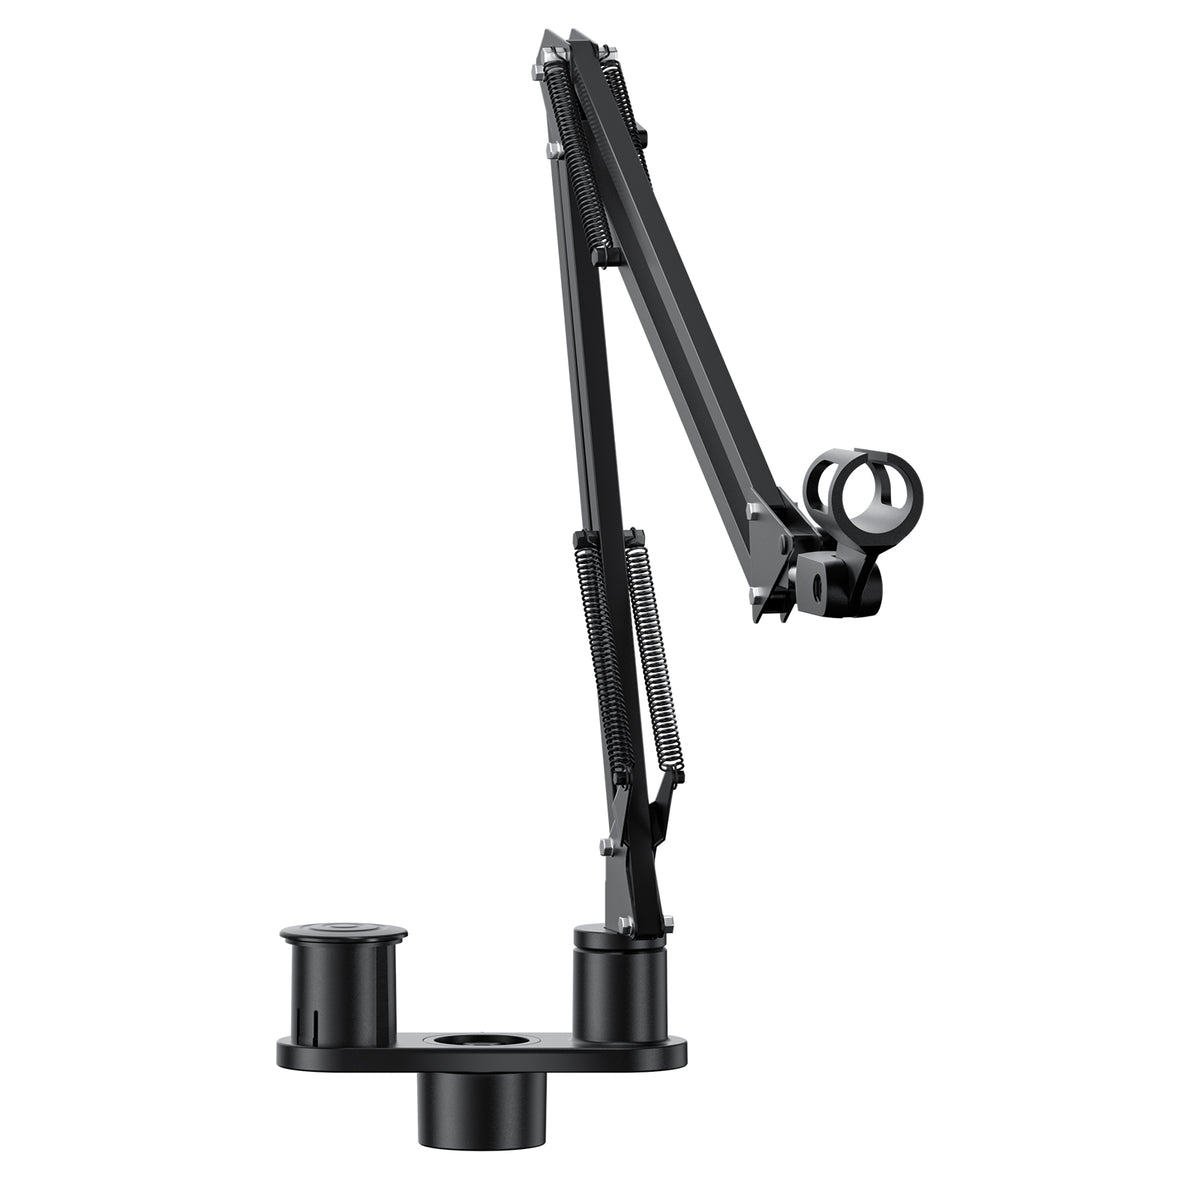 Viozon Microphone Mount with Parallel Connector (DZ-MM)